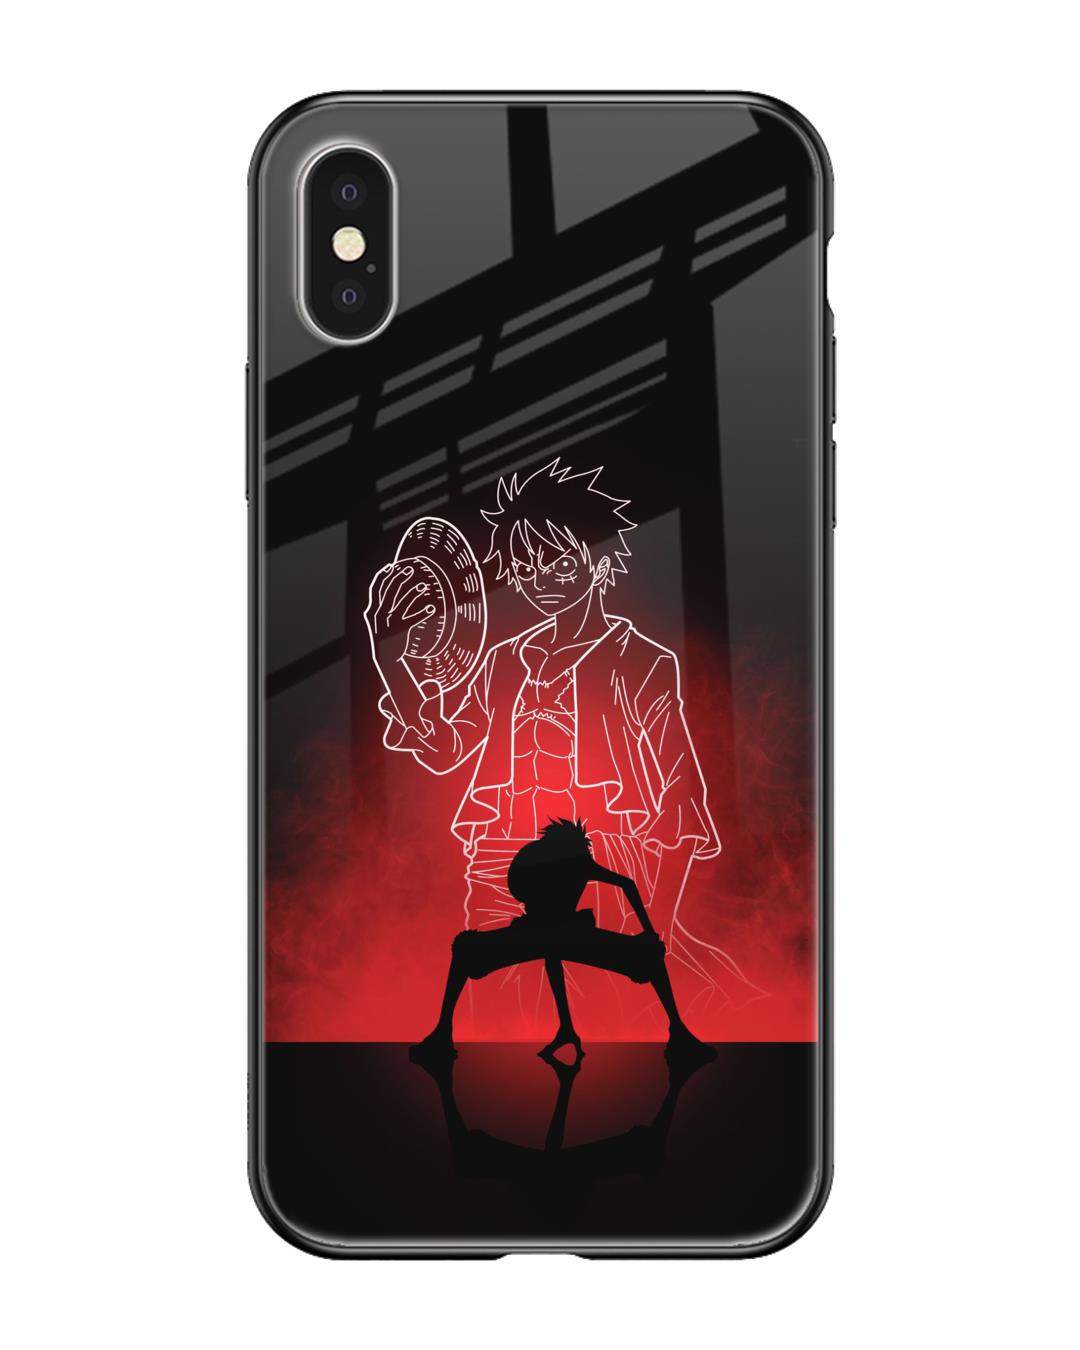 Anime iPhone XS Back Skin Wrap | Only Rs.149 – SkinLelo